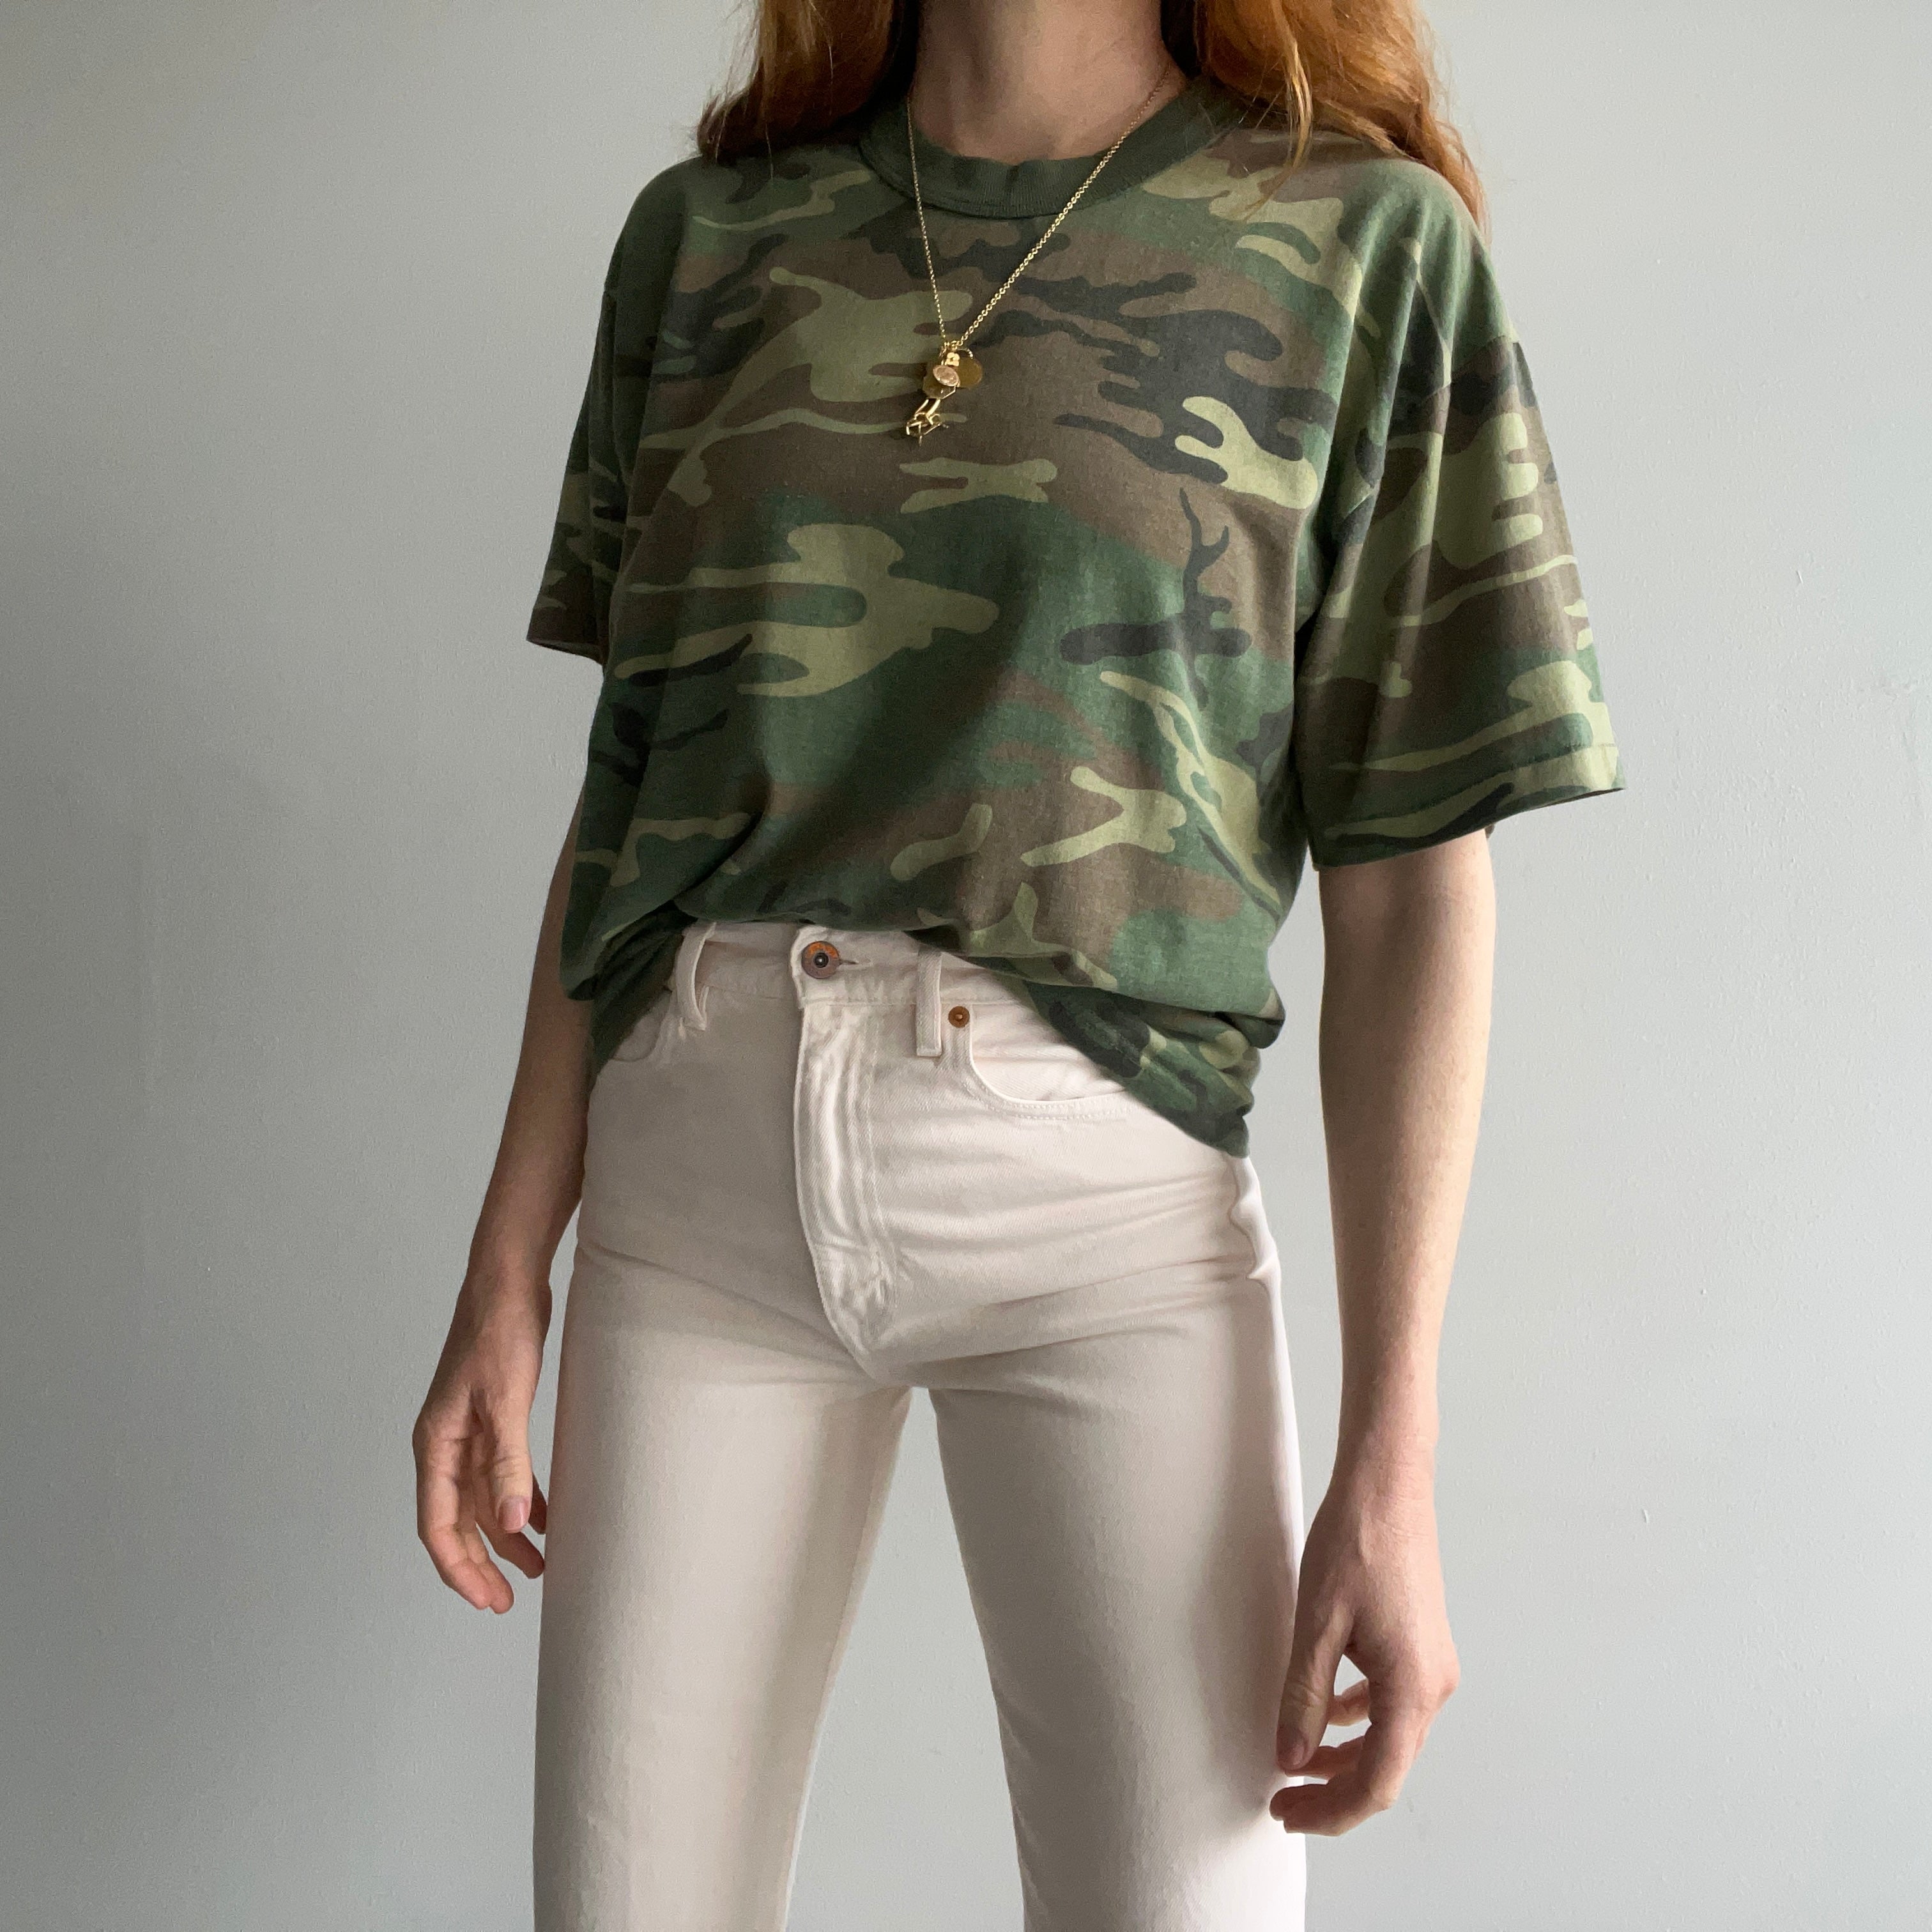 1980/90s Slouchy Camo T-Shirt by Rothco